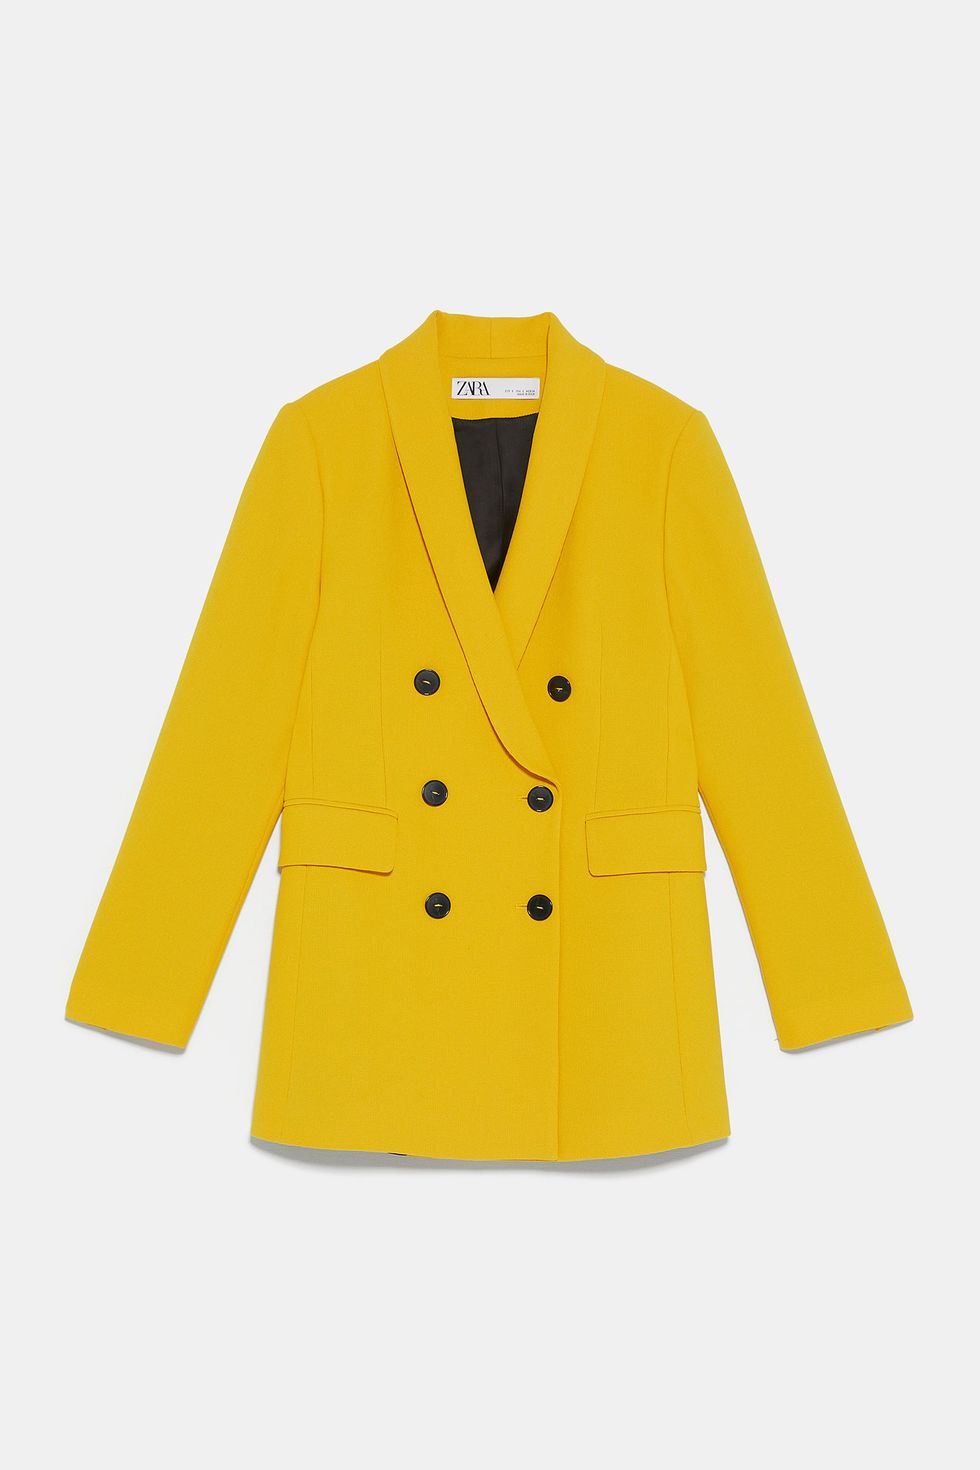 Clothing, Outerwear, Yellow, Sleeve, Jacket, Button, Blazer, Top, Coat, 